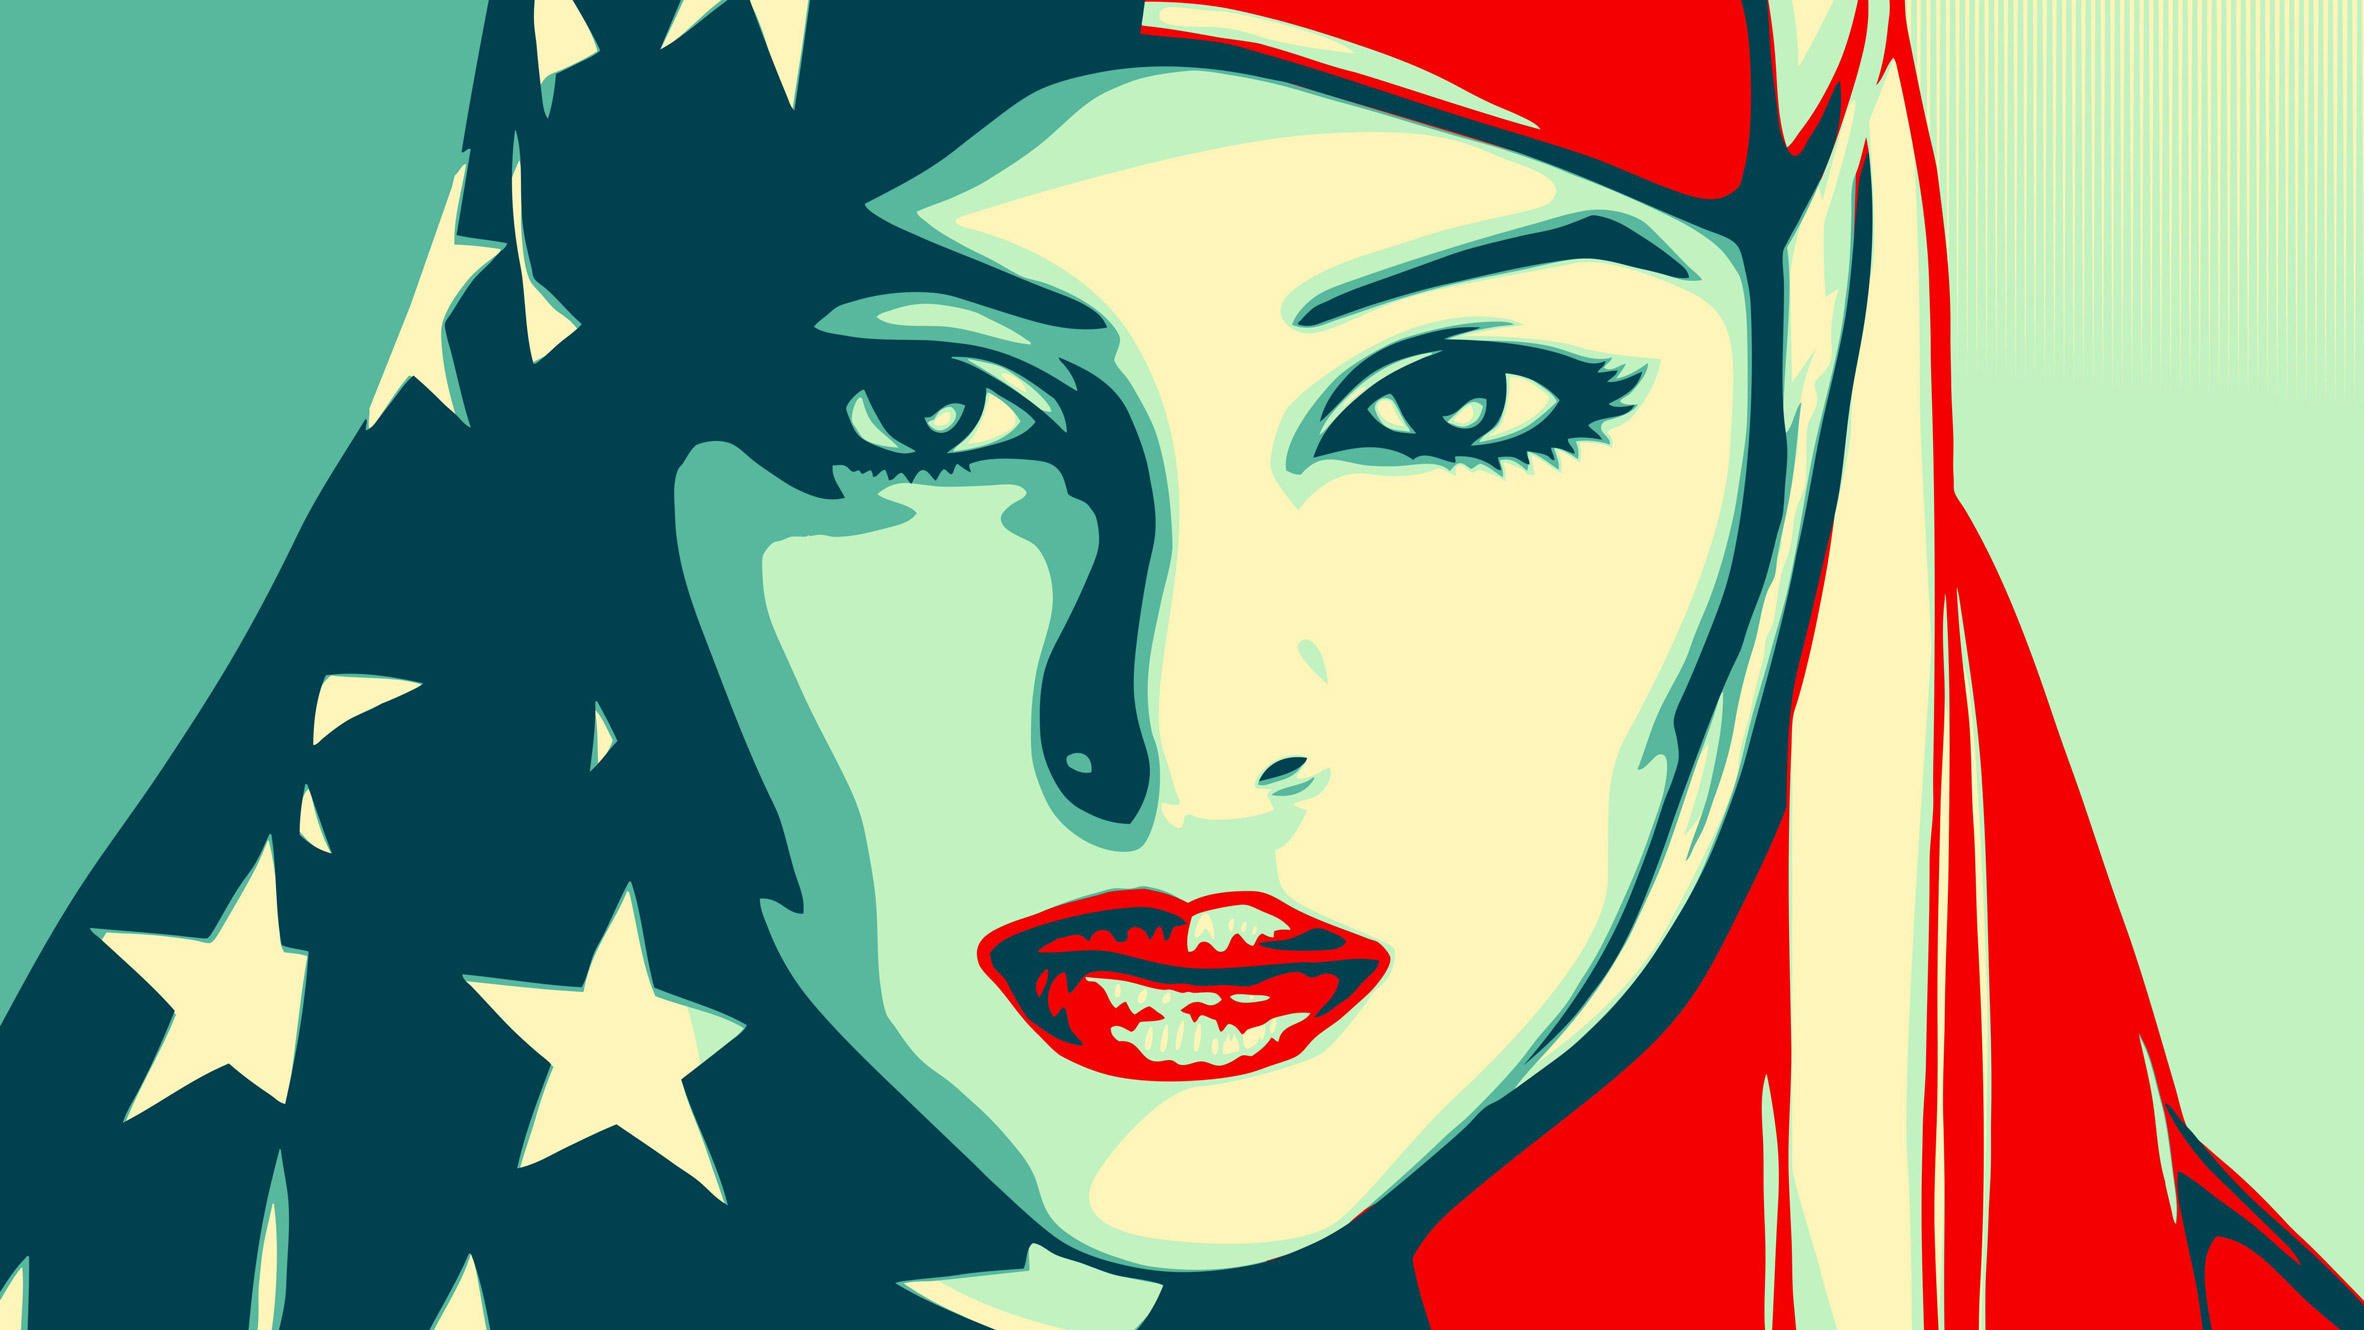 Shepard Fairey adapts Obama's Hope poster for inauguration